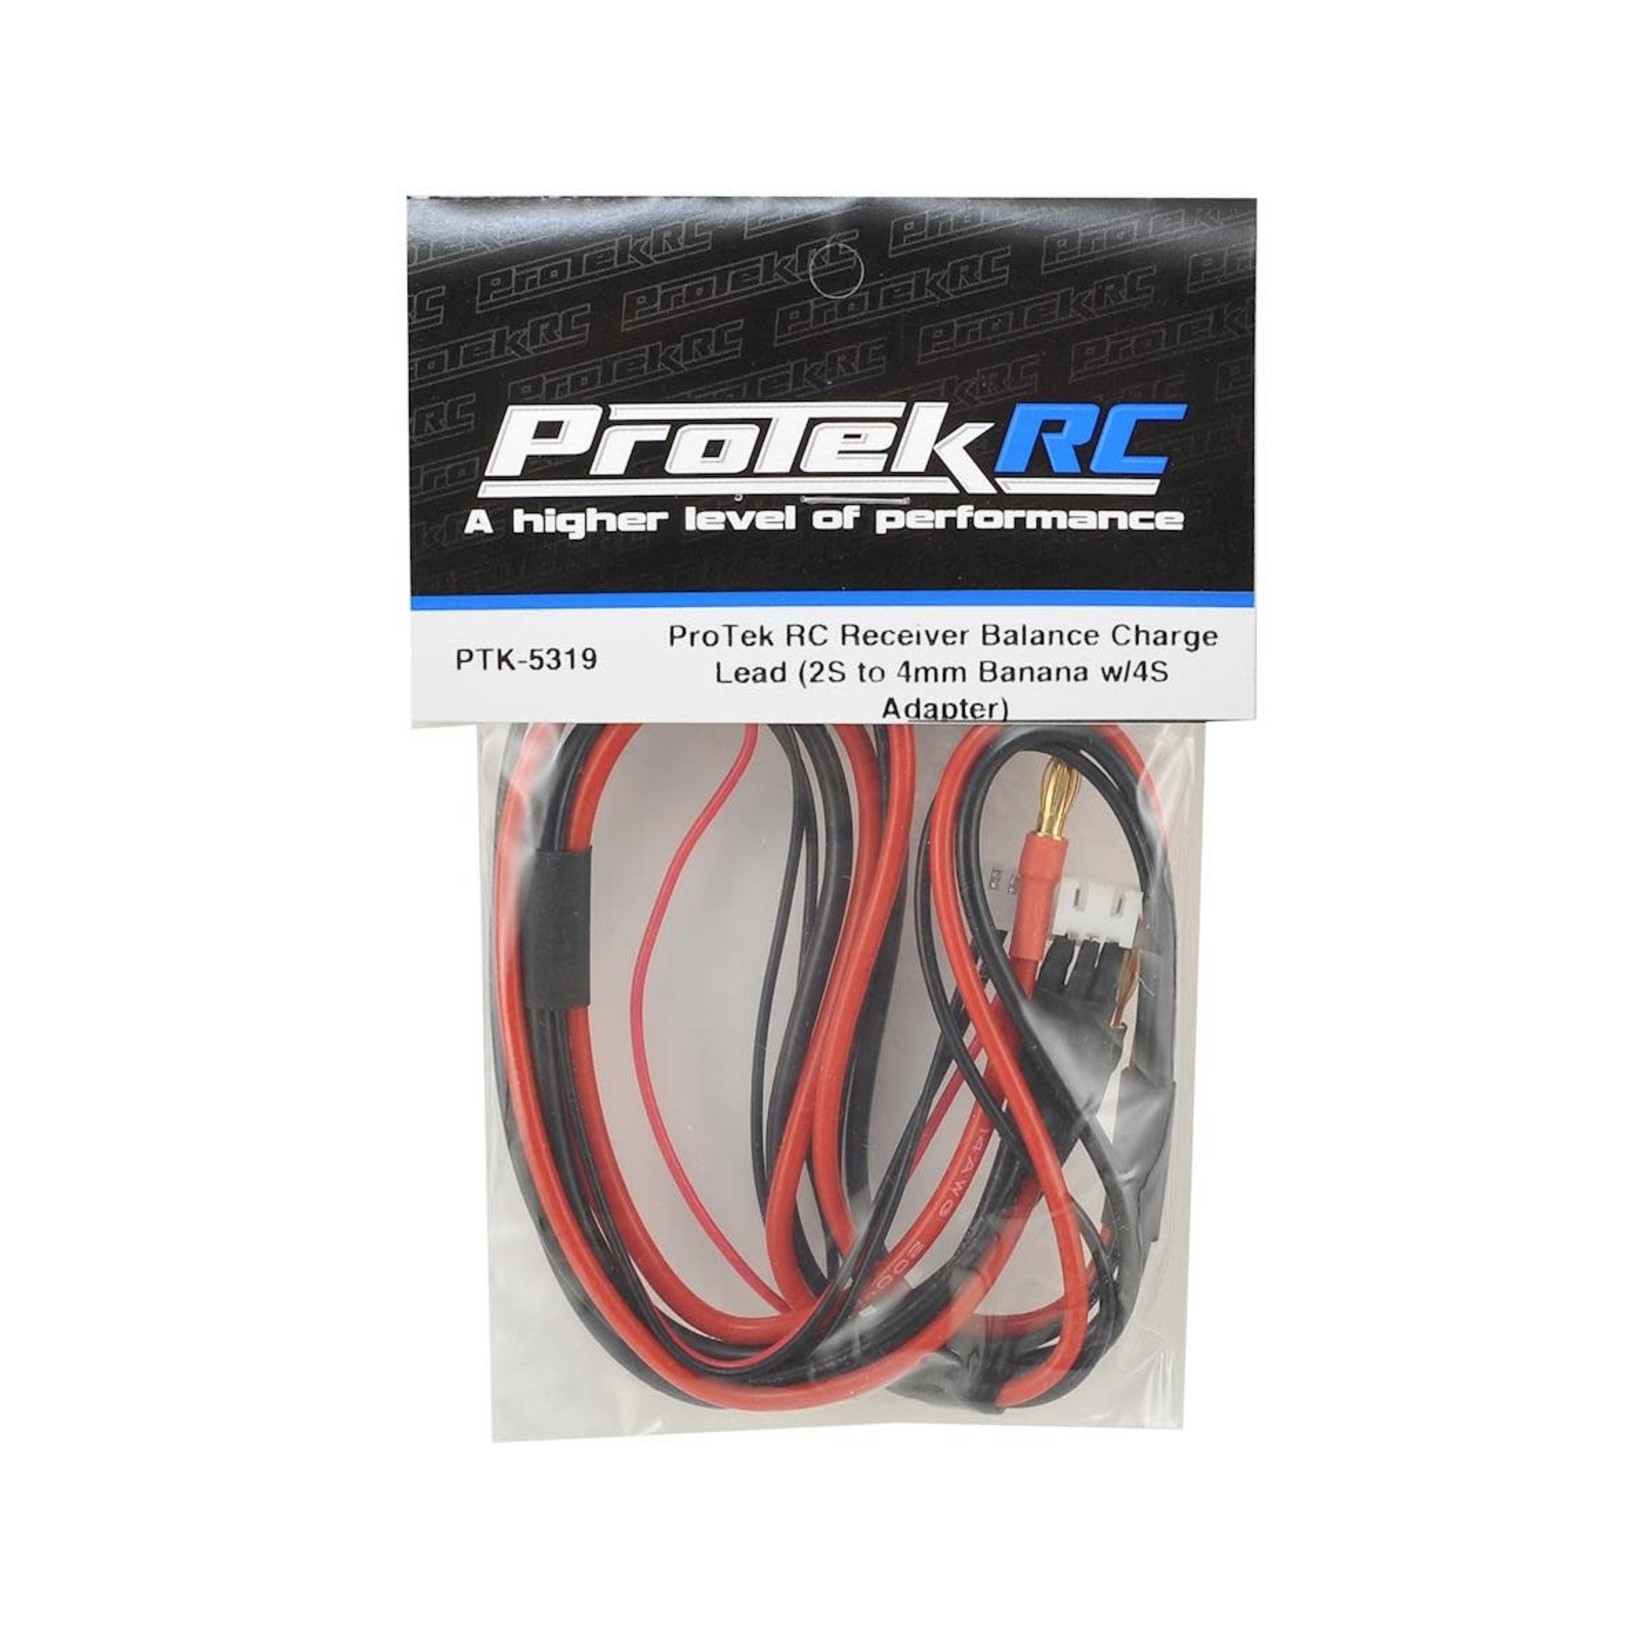 ProTek RC ProTek RC Receiver Balance Charge Lead (2S to 4mm Banana w/4S Adapter) #PTK-5319